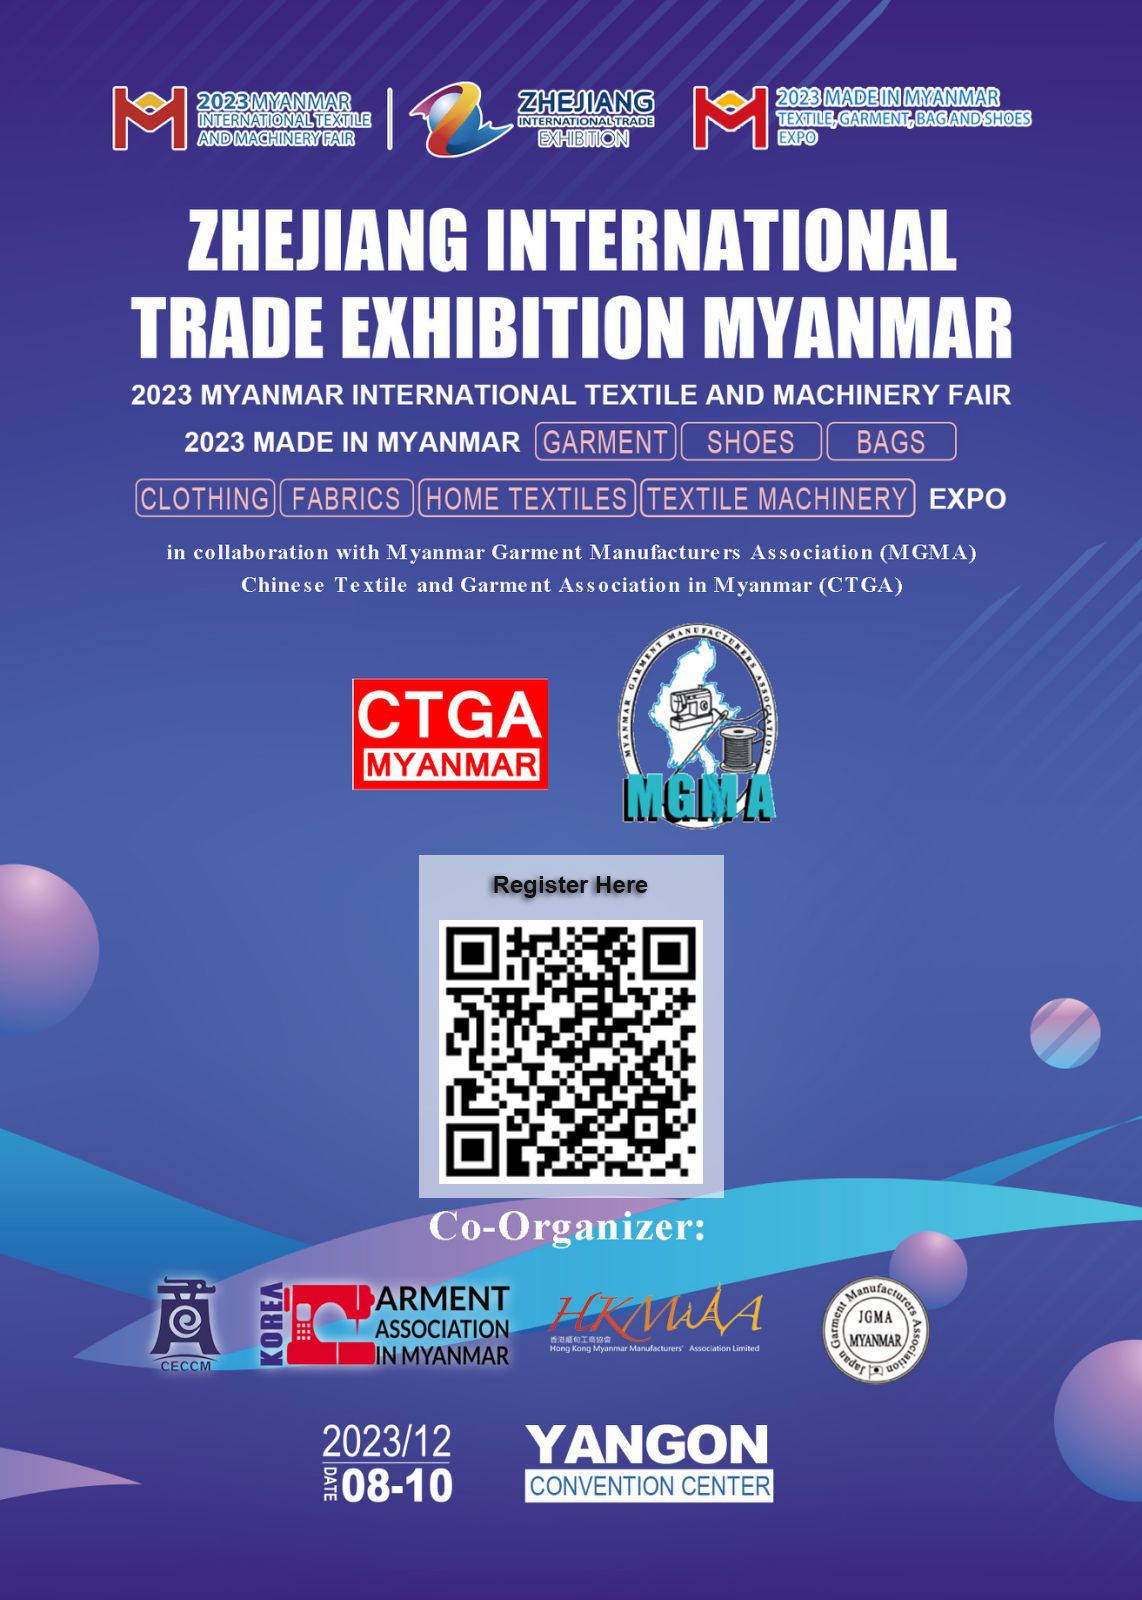 MADE IN MYANMAR garment shoes bag EXPO